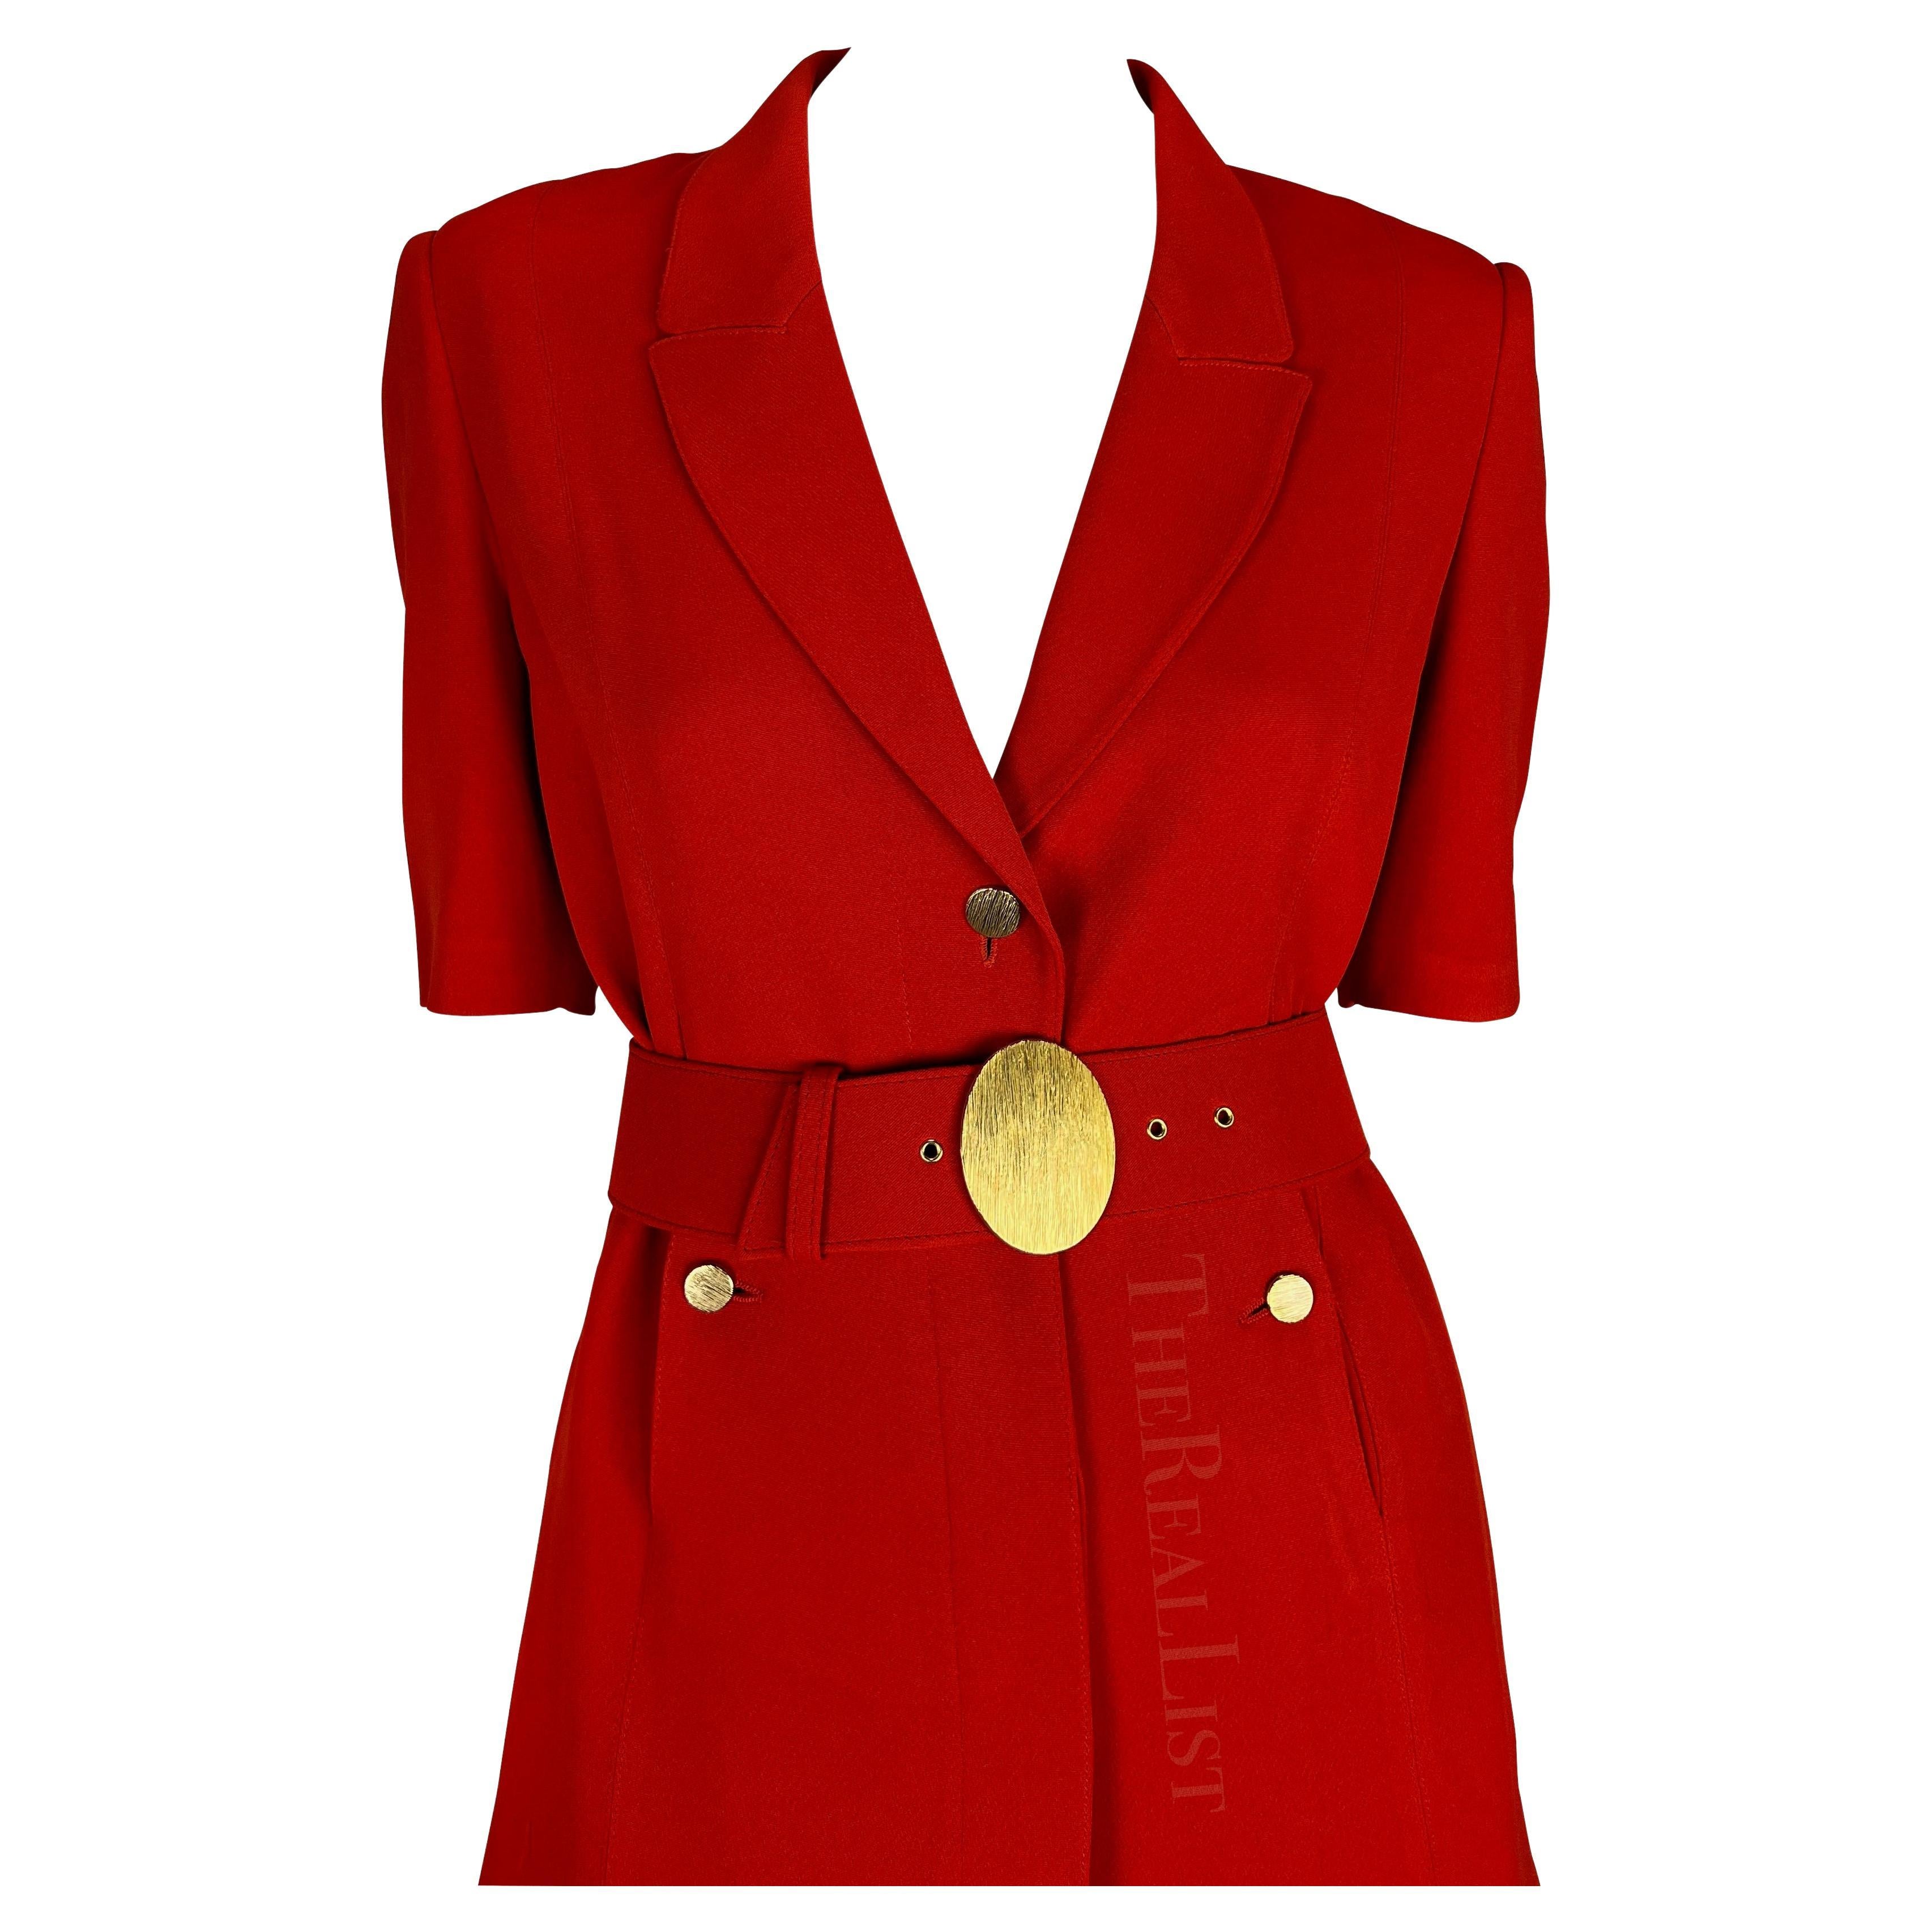 Presenting a fabulous bright red Claude Montana pantsuit. From the 1990s, the suit is comprised of pleated pants, a short-sleeve jacket, and a matching belt. The jacket, adorned with half-length sleeves and exquisite gold-tone buttons that perfectly